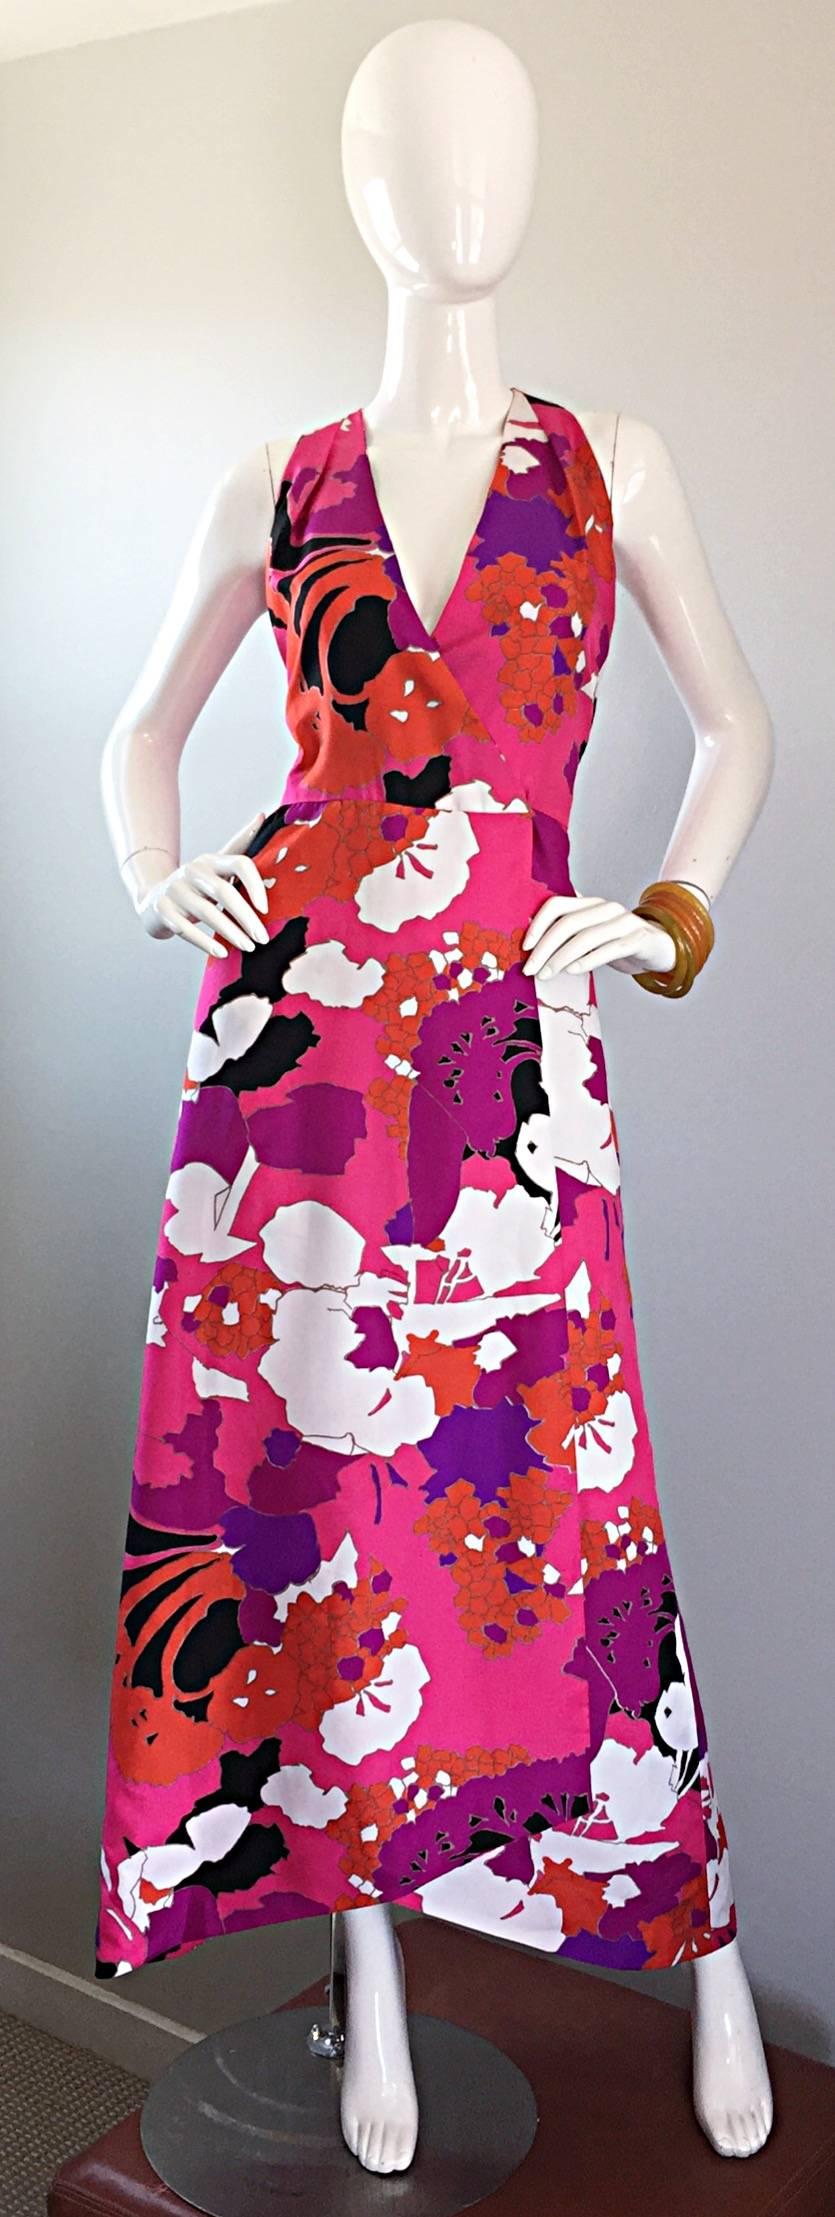 Brilliant 70s ADELE SIMPSON silk halter maxi dress, with a fantastic asymmetrical hem. Vibrant oriental inspired print in vivid hues of neon pinks, purples, oranges, black and white. Flattering wrap style with interior hook-and-eye closures. Looks